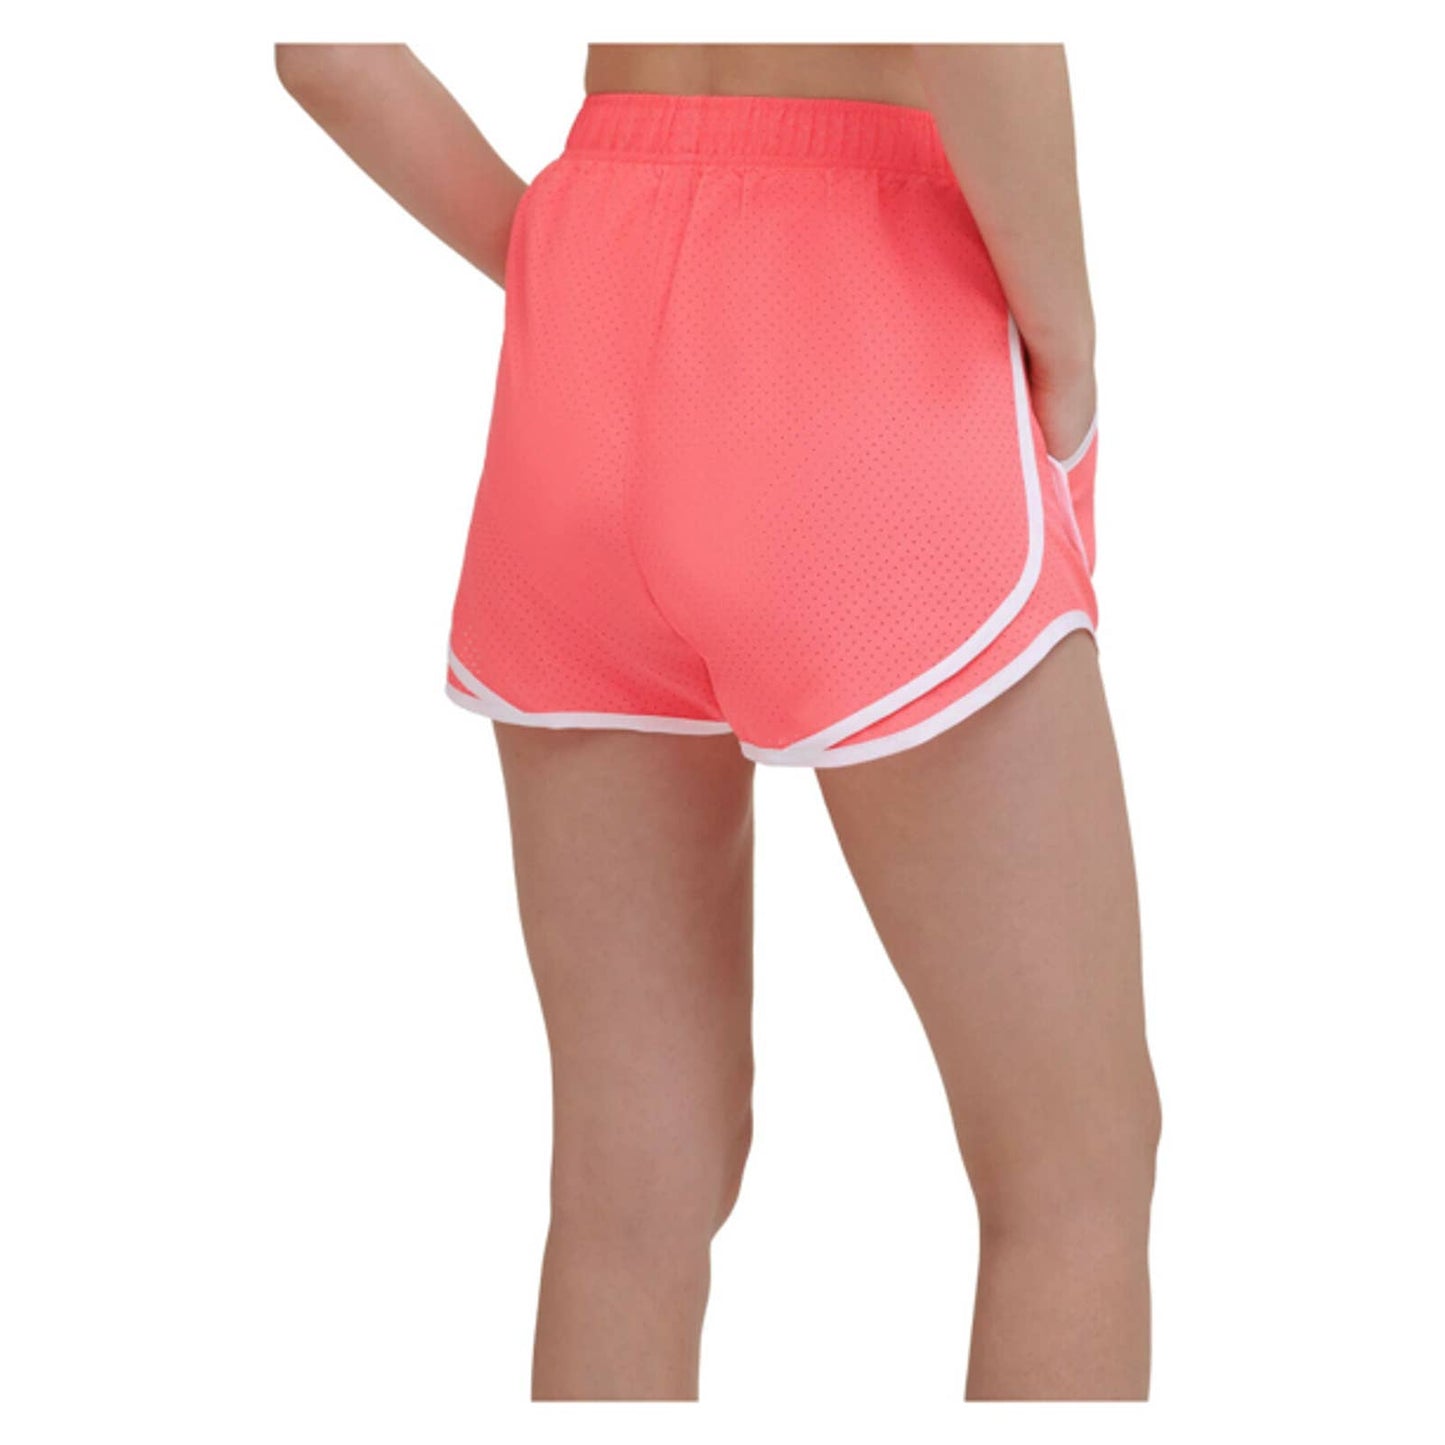 Calvin Klein Women's Perforated Shorts Radiance, NWT, $36